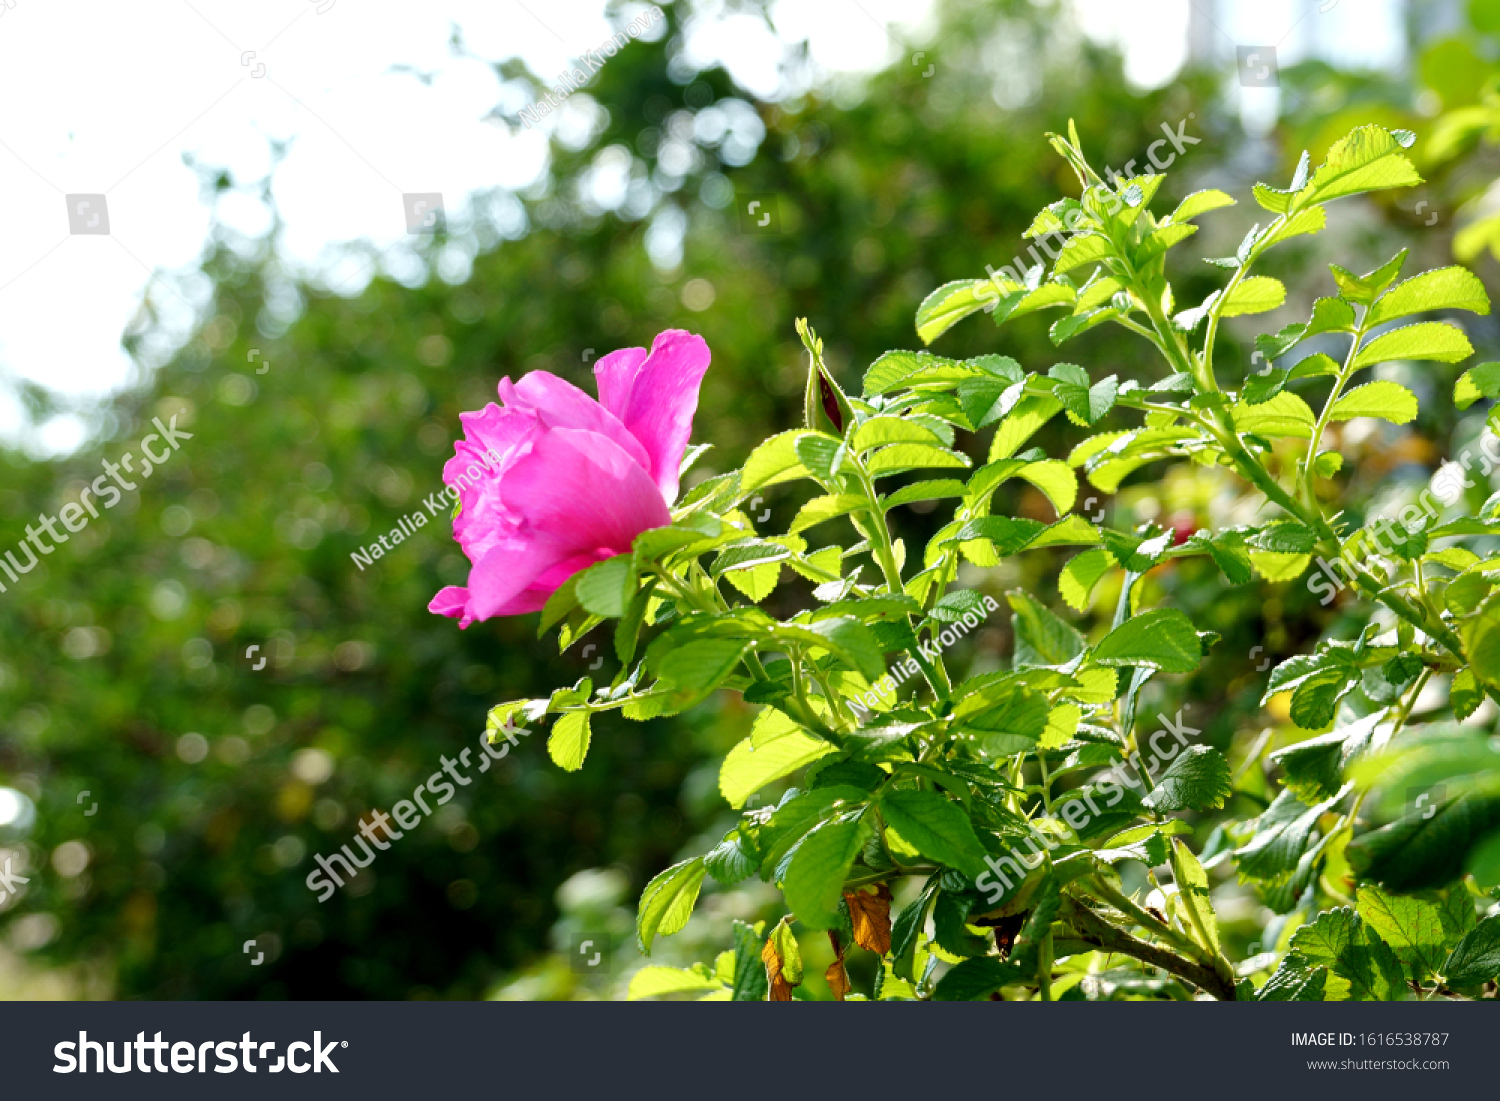 Flowering pink rosehip with green leaves. Spring, summer botany photo #1616538787